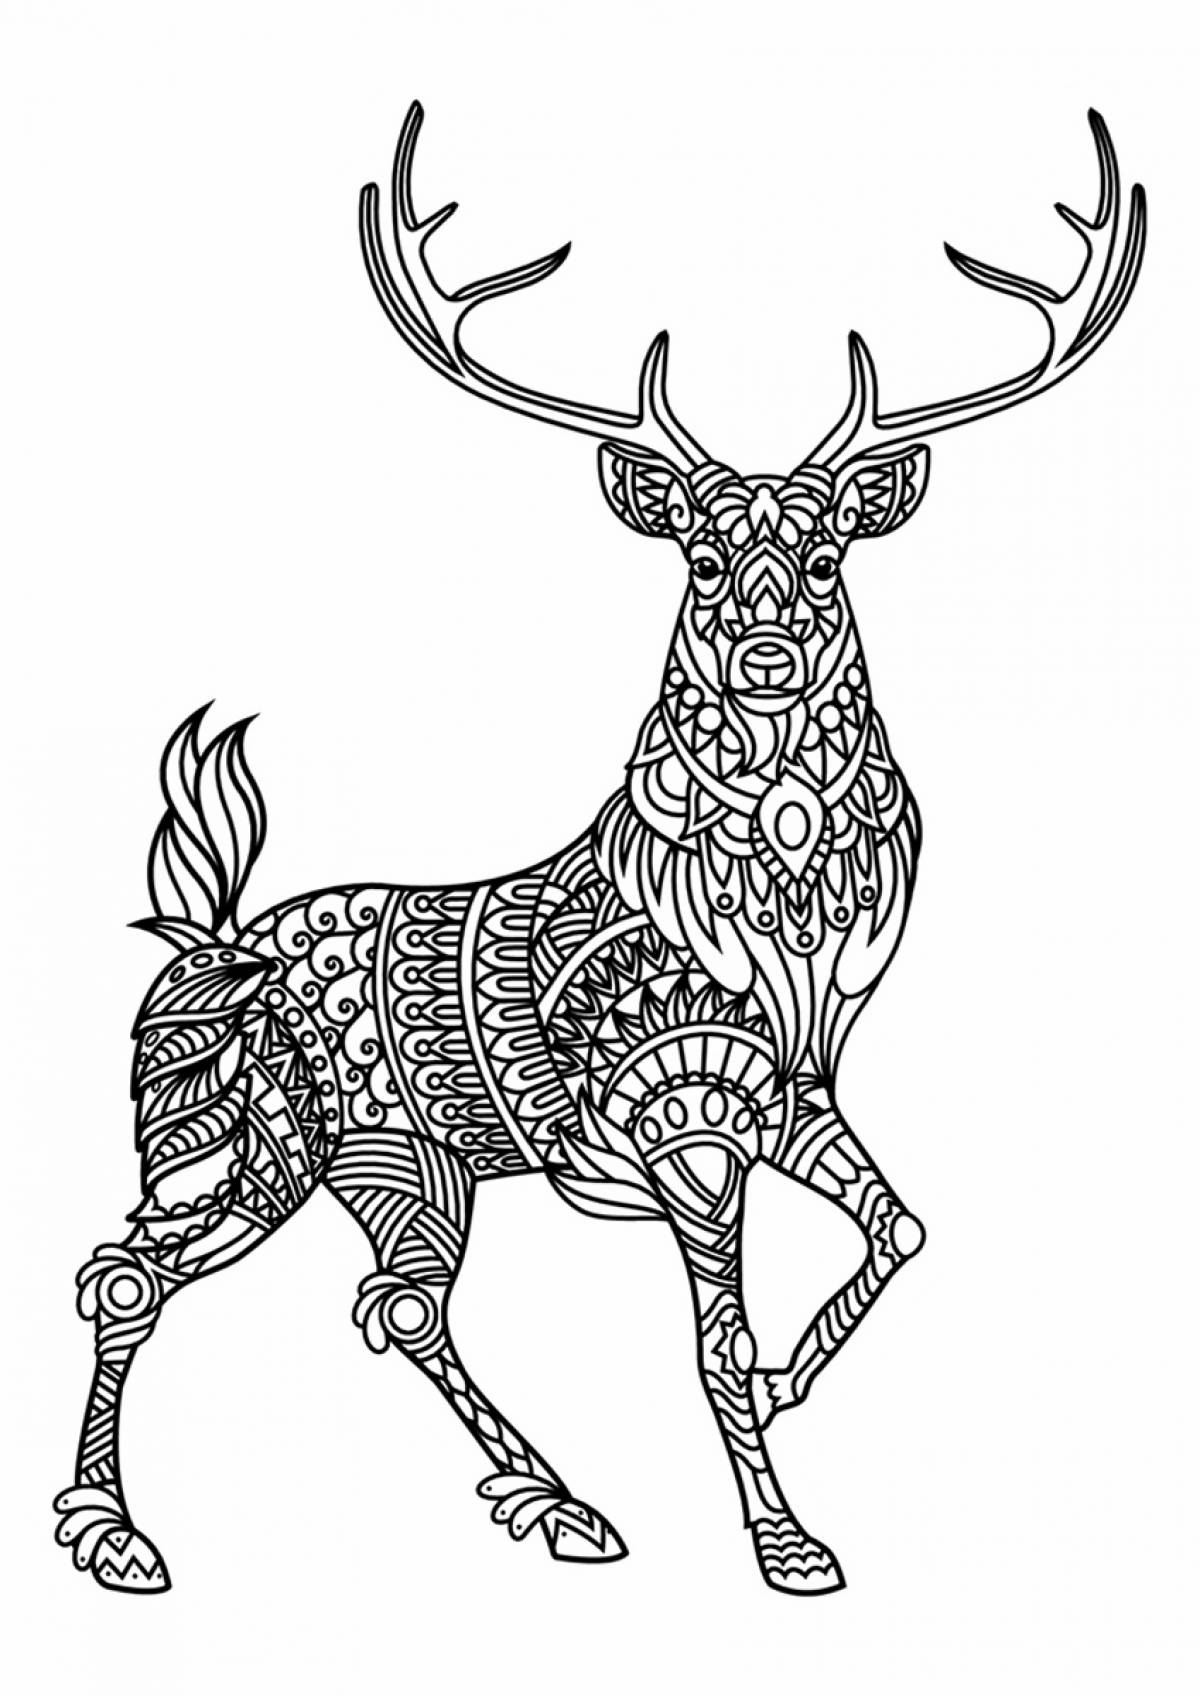 Fun animal coloring with a pattern